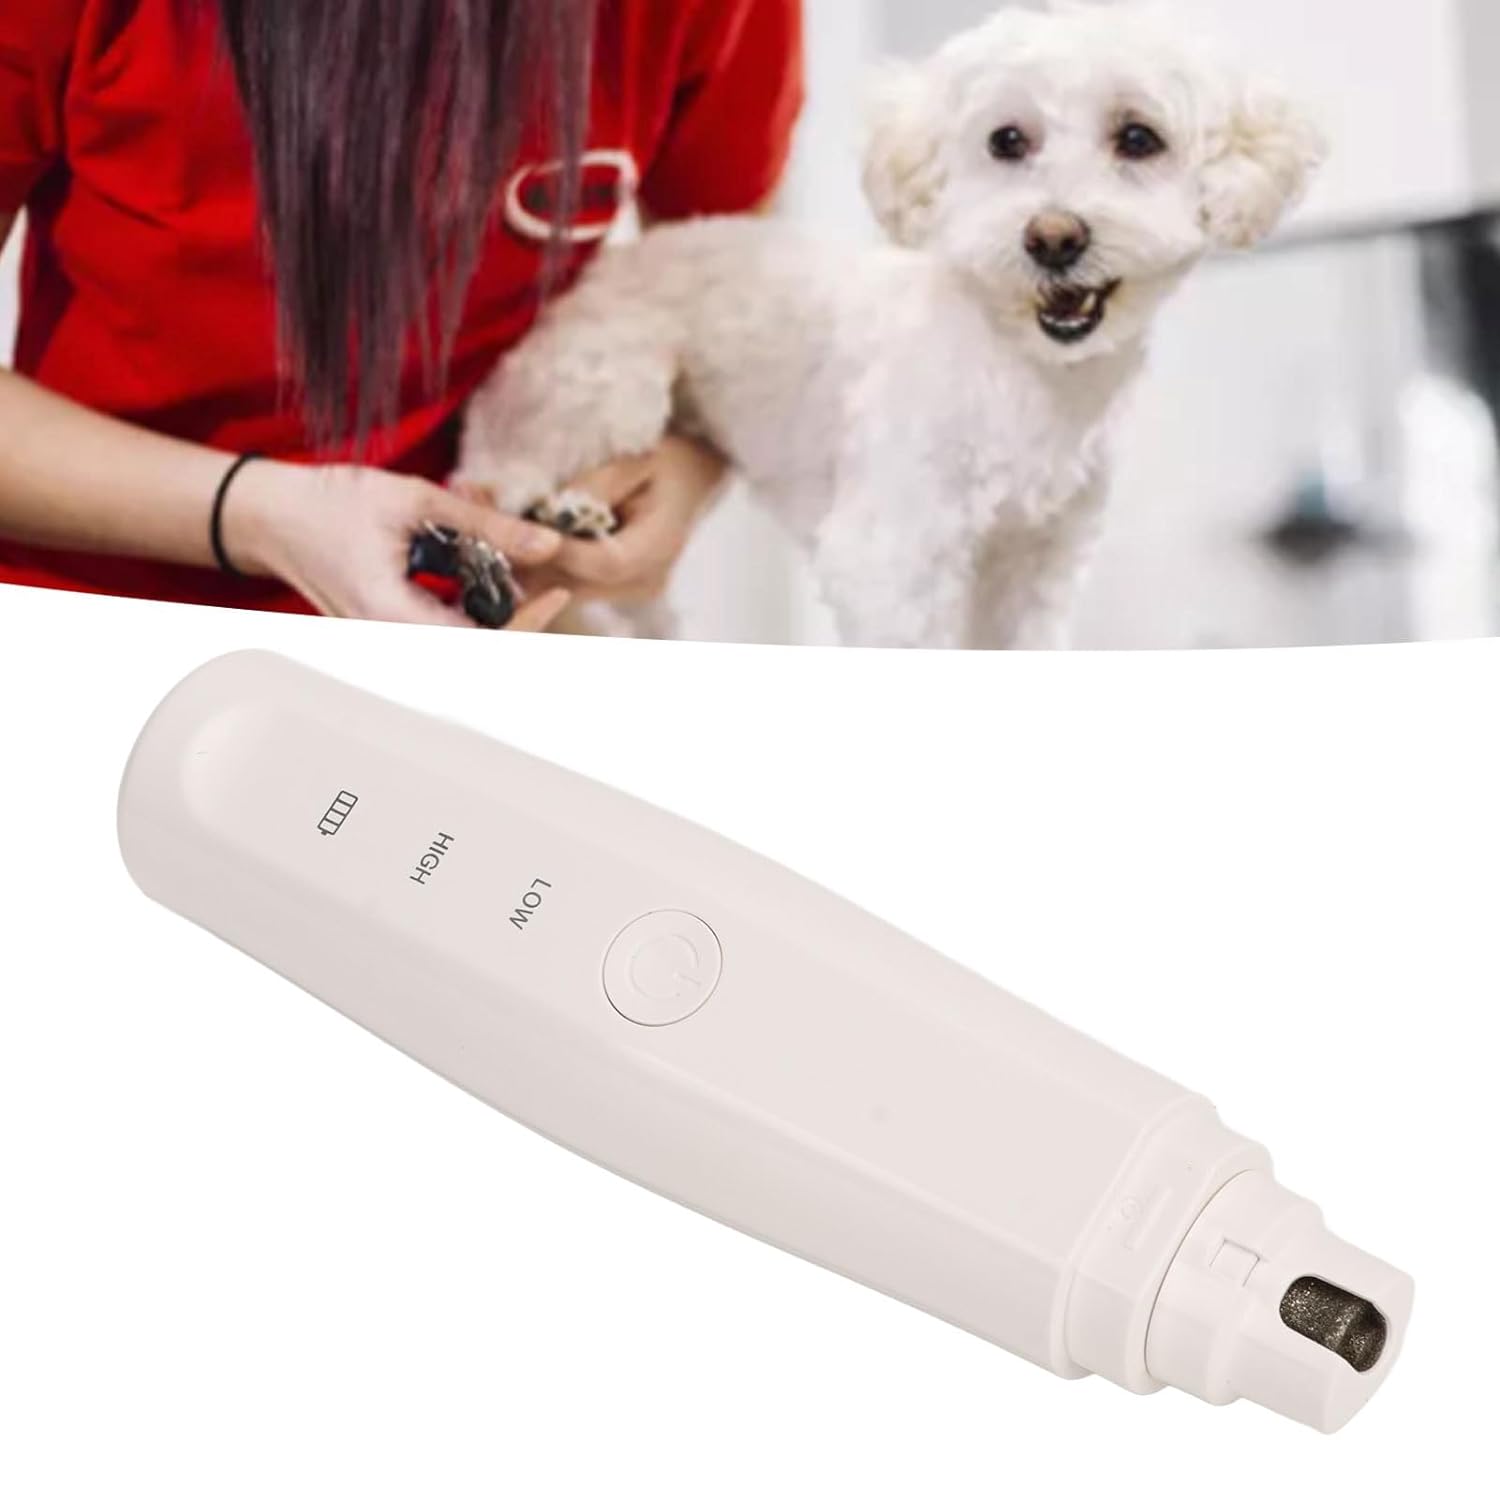 Alomejor Rechargeable Pet Nail Grinder, Electric Dog Cat Nail Trimmer with 2 Speeds Painless Paws Grooming Device